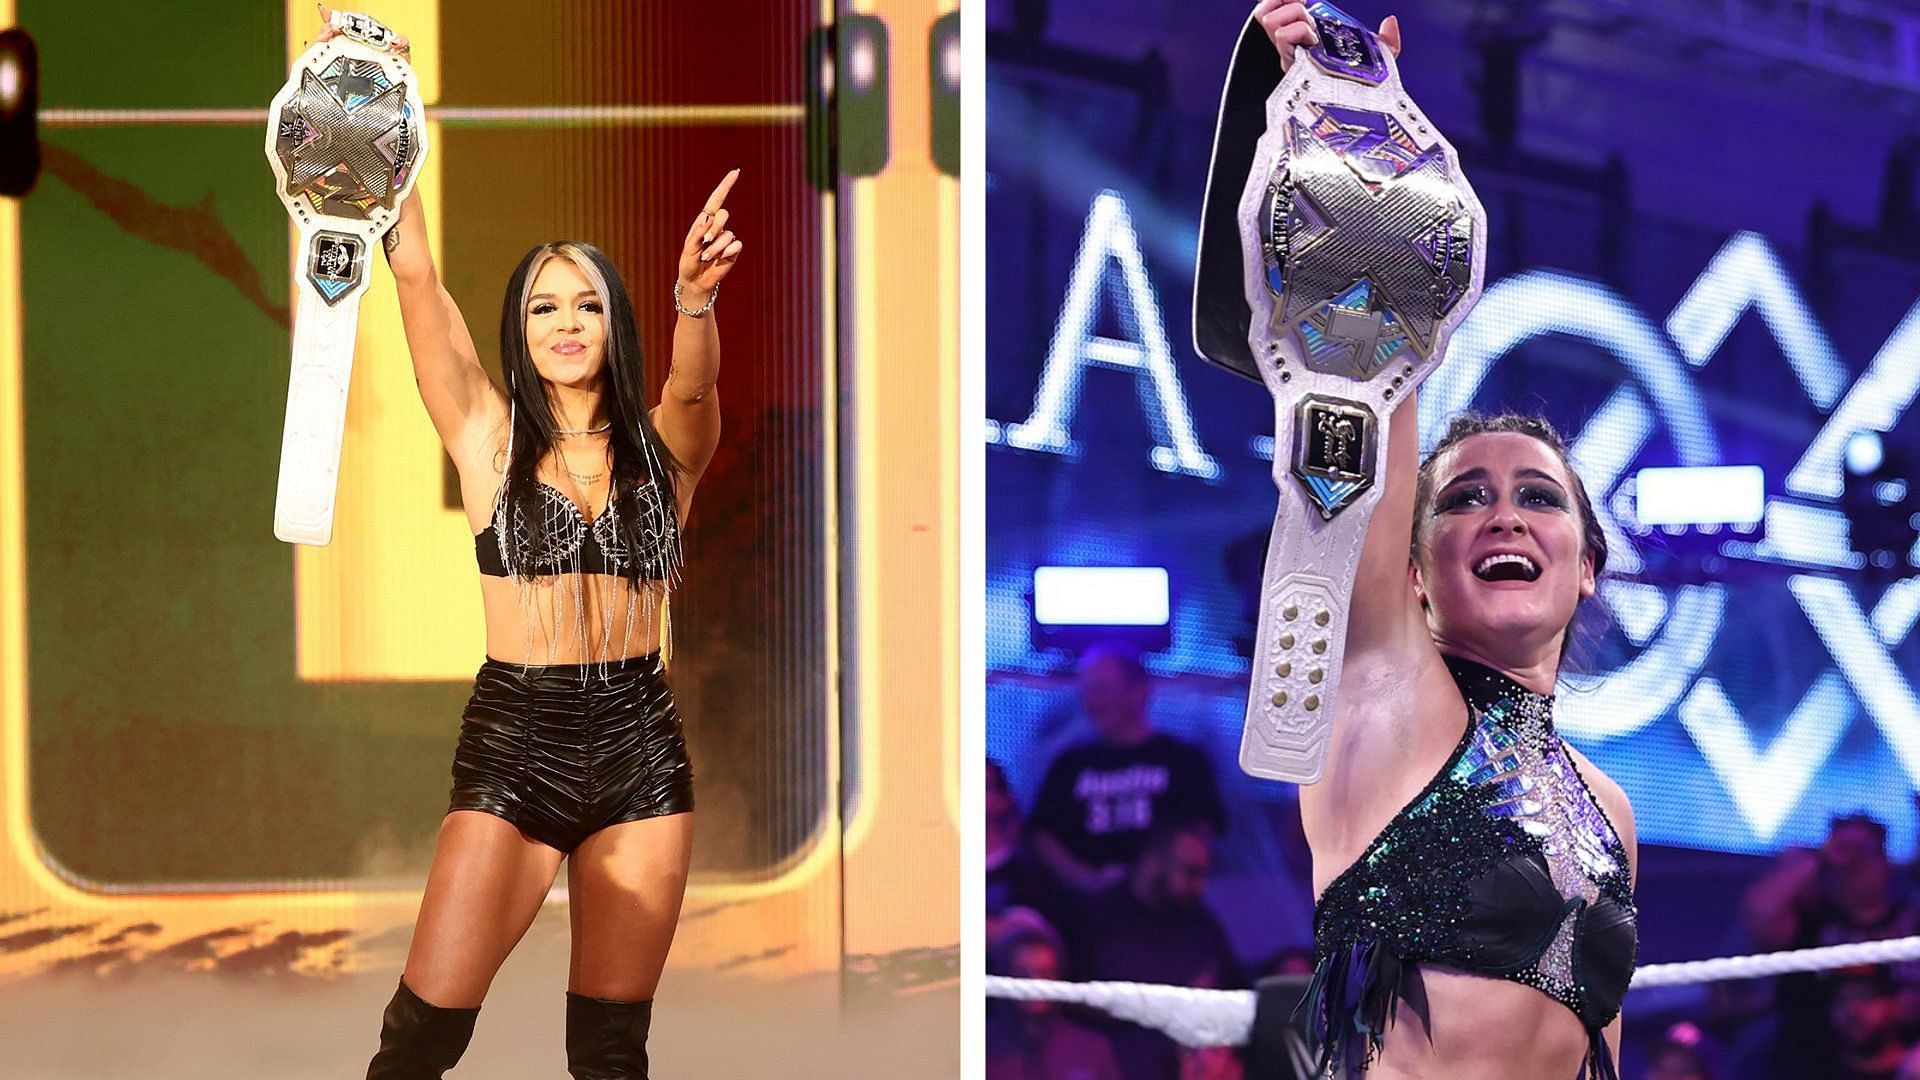 Cora Jade made her return to WWE at NXT Deadline 2023